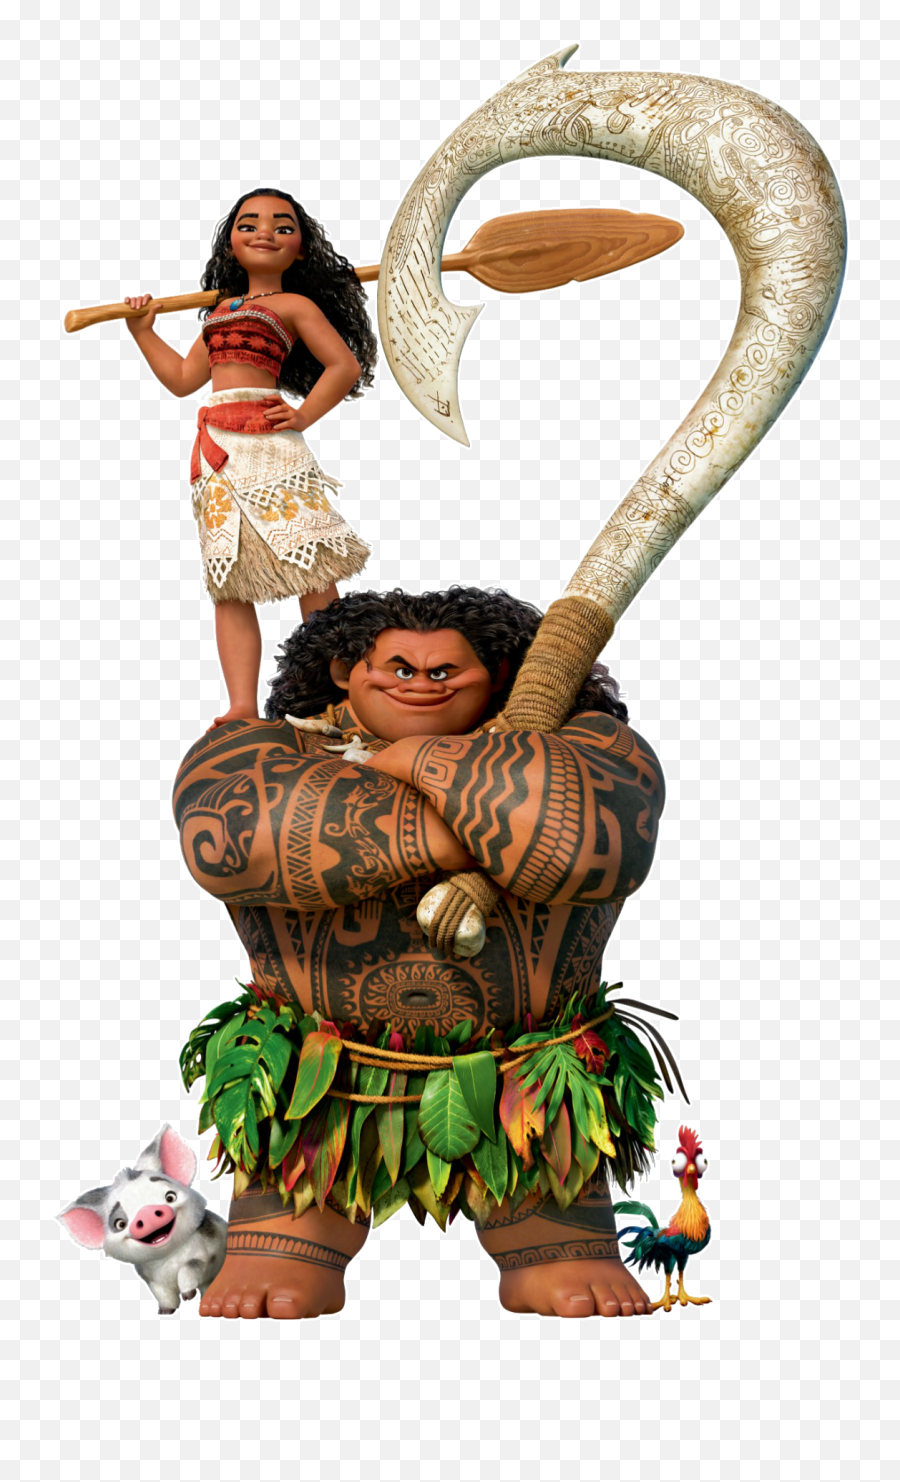 Maui Moana Png Images Collection For Transparent Background